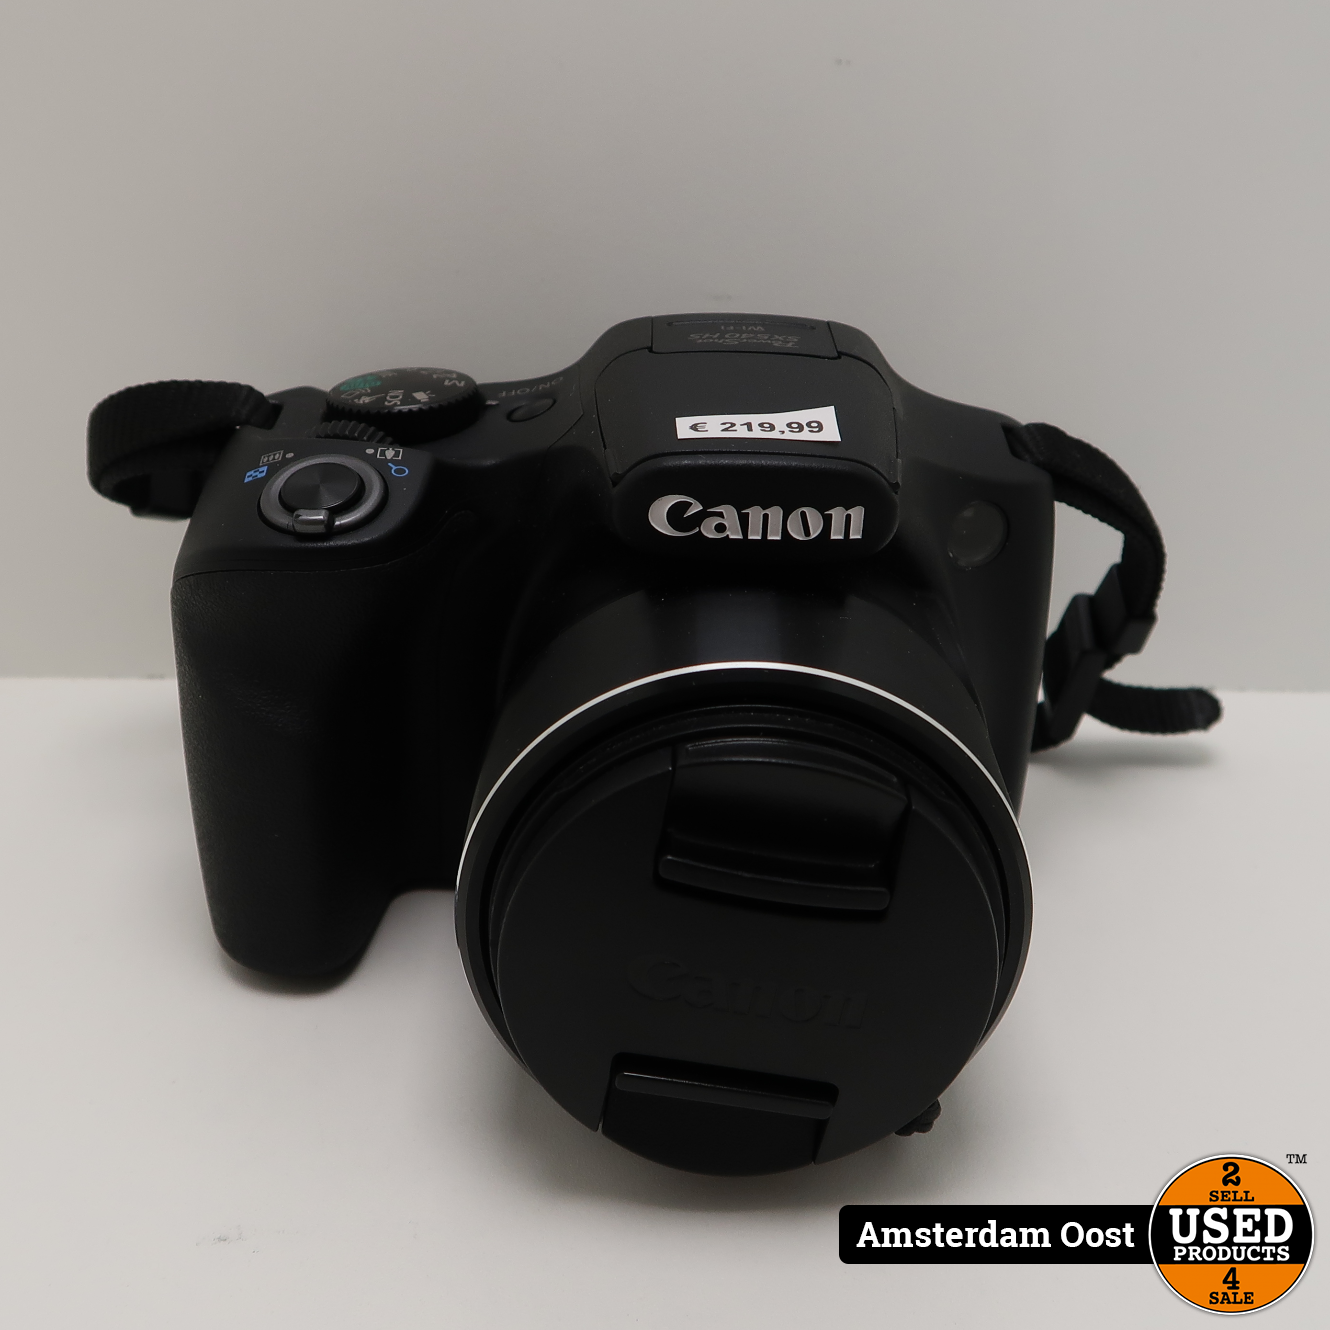 Powershot SX540 HS 21.1MP Camera | in Zeer Nette Staat - Used Products Amsterdam Oost